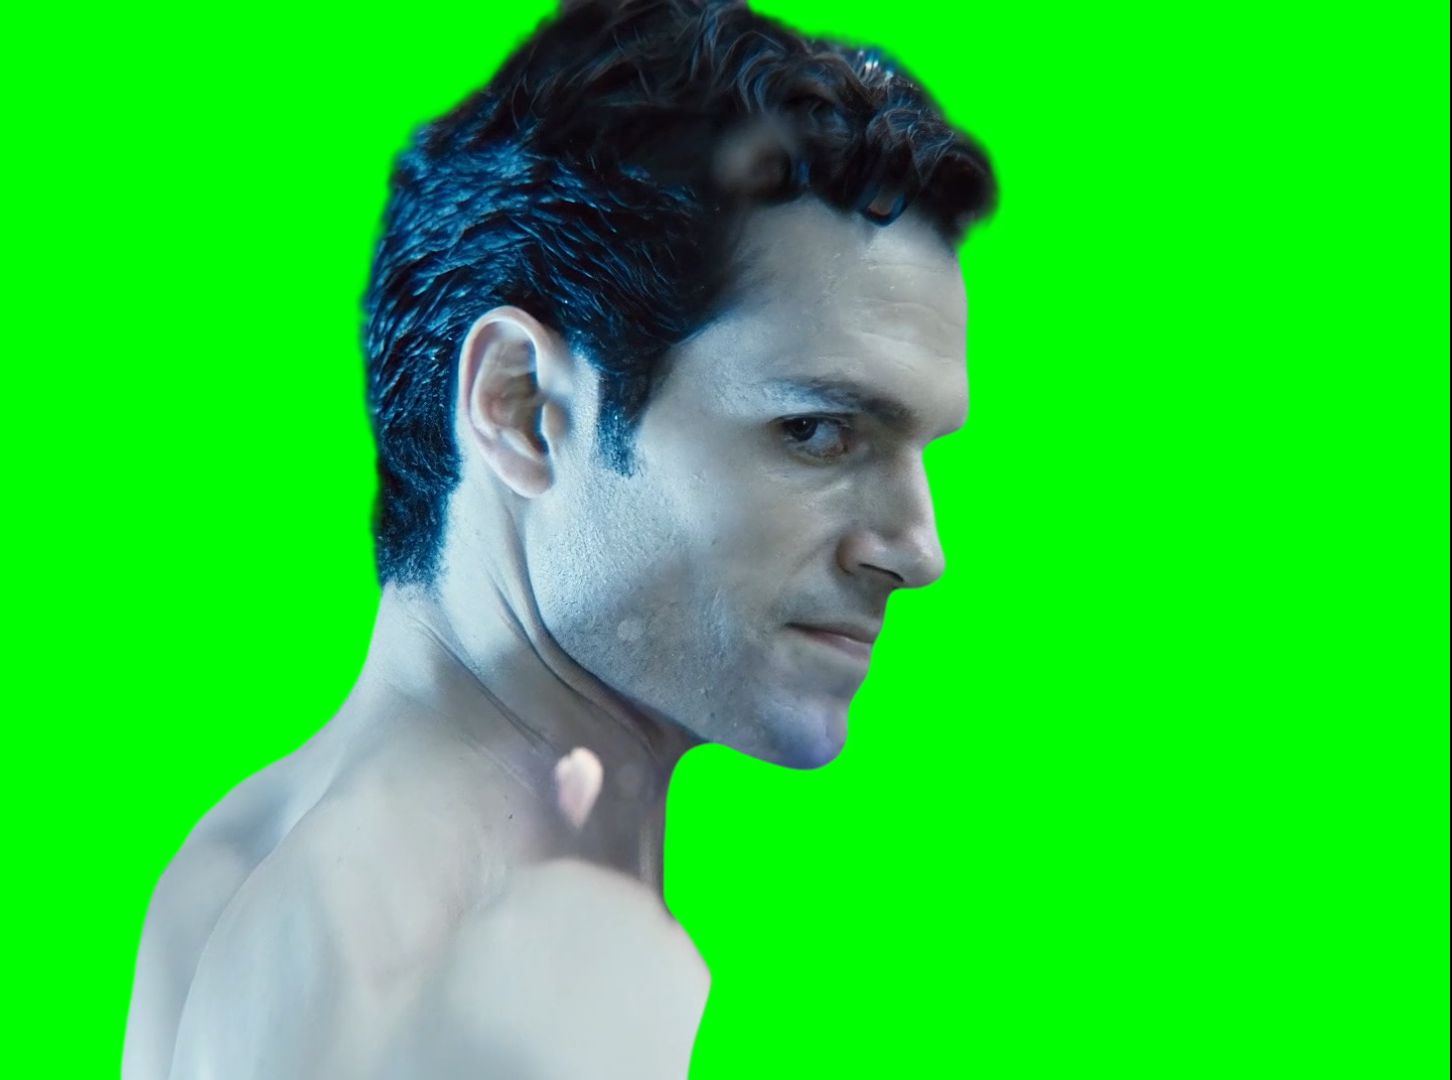 Superman looking at The Flash running meme - Justice League Snyder Cut (Green Screen)